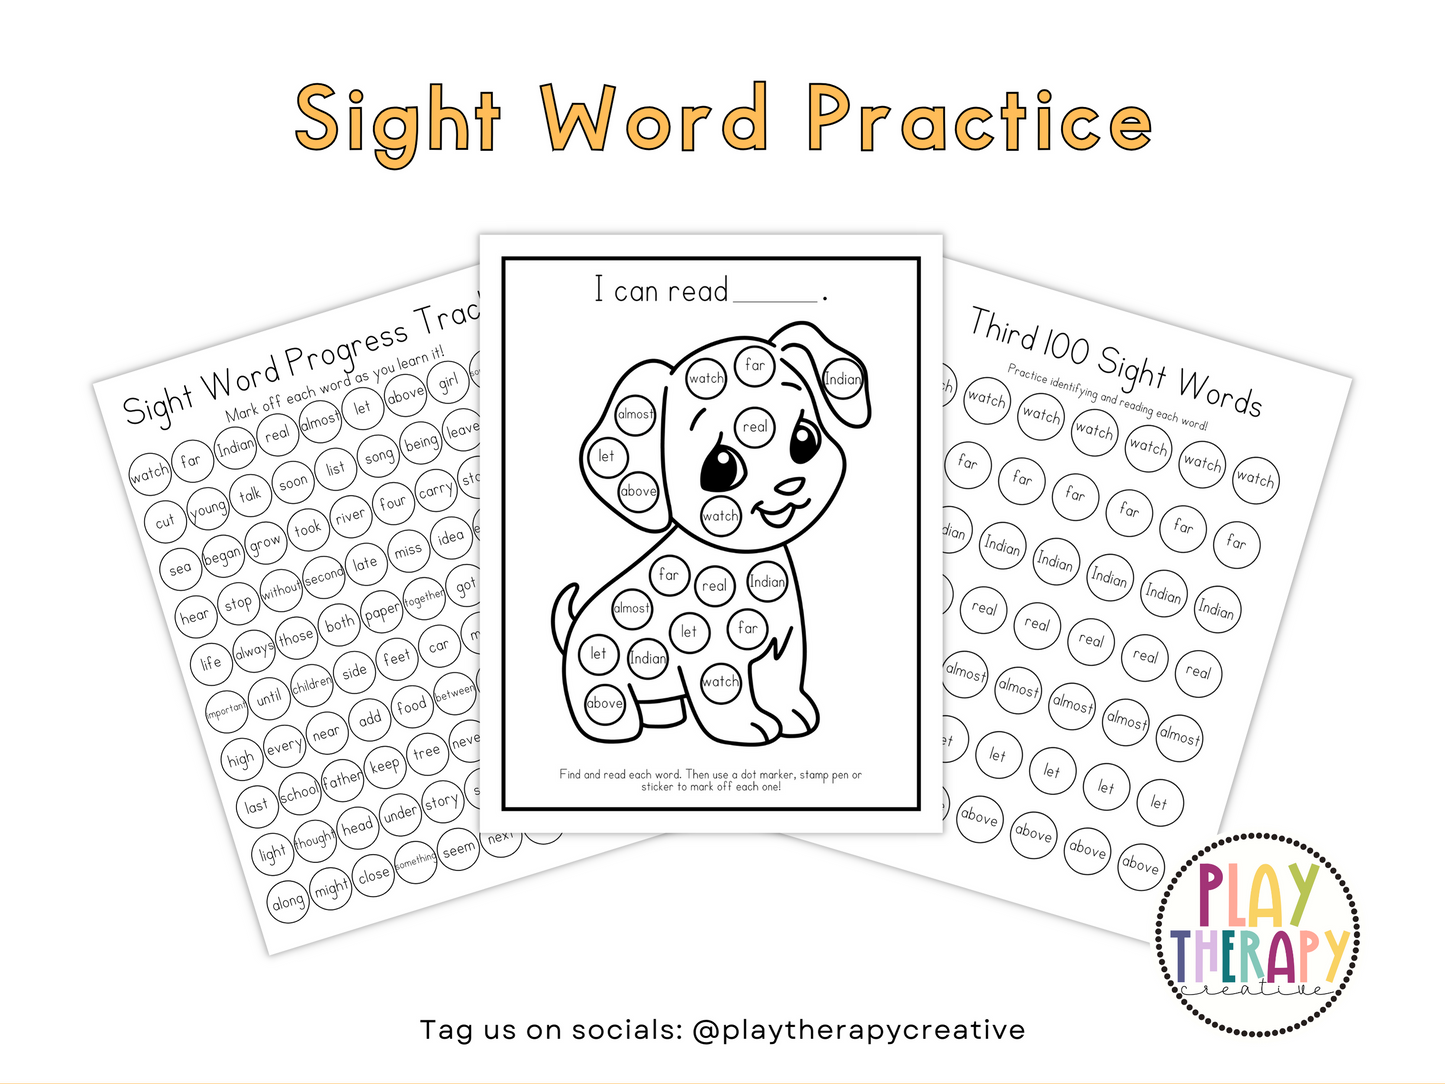 Dot Marker Reading Practice Coloring Pages | Third 100 Sight Words